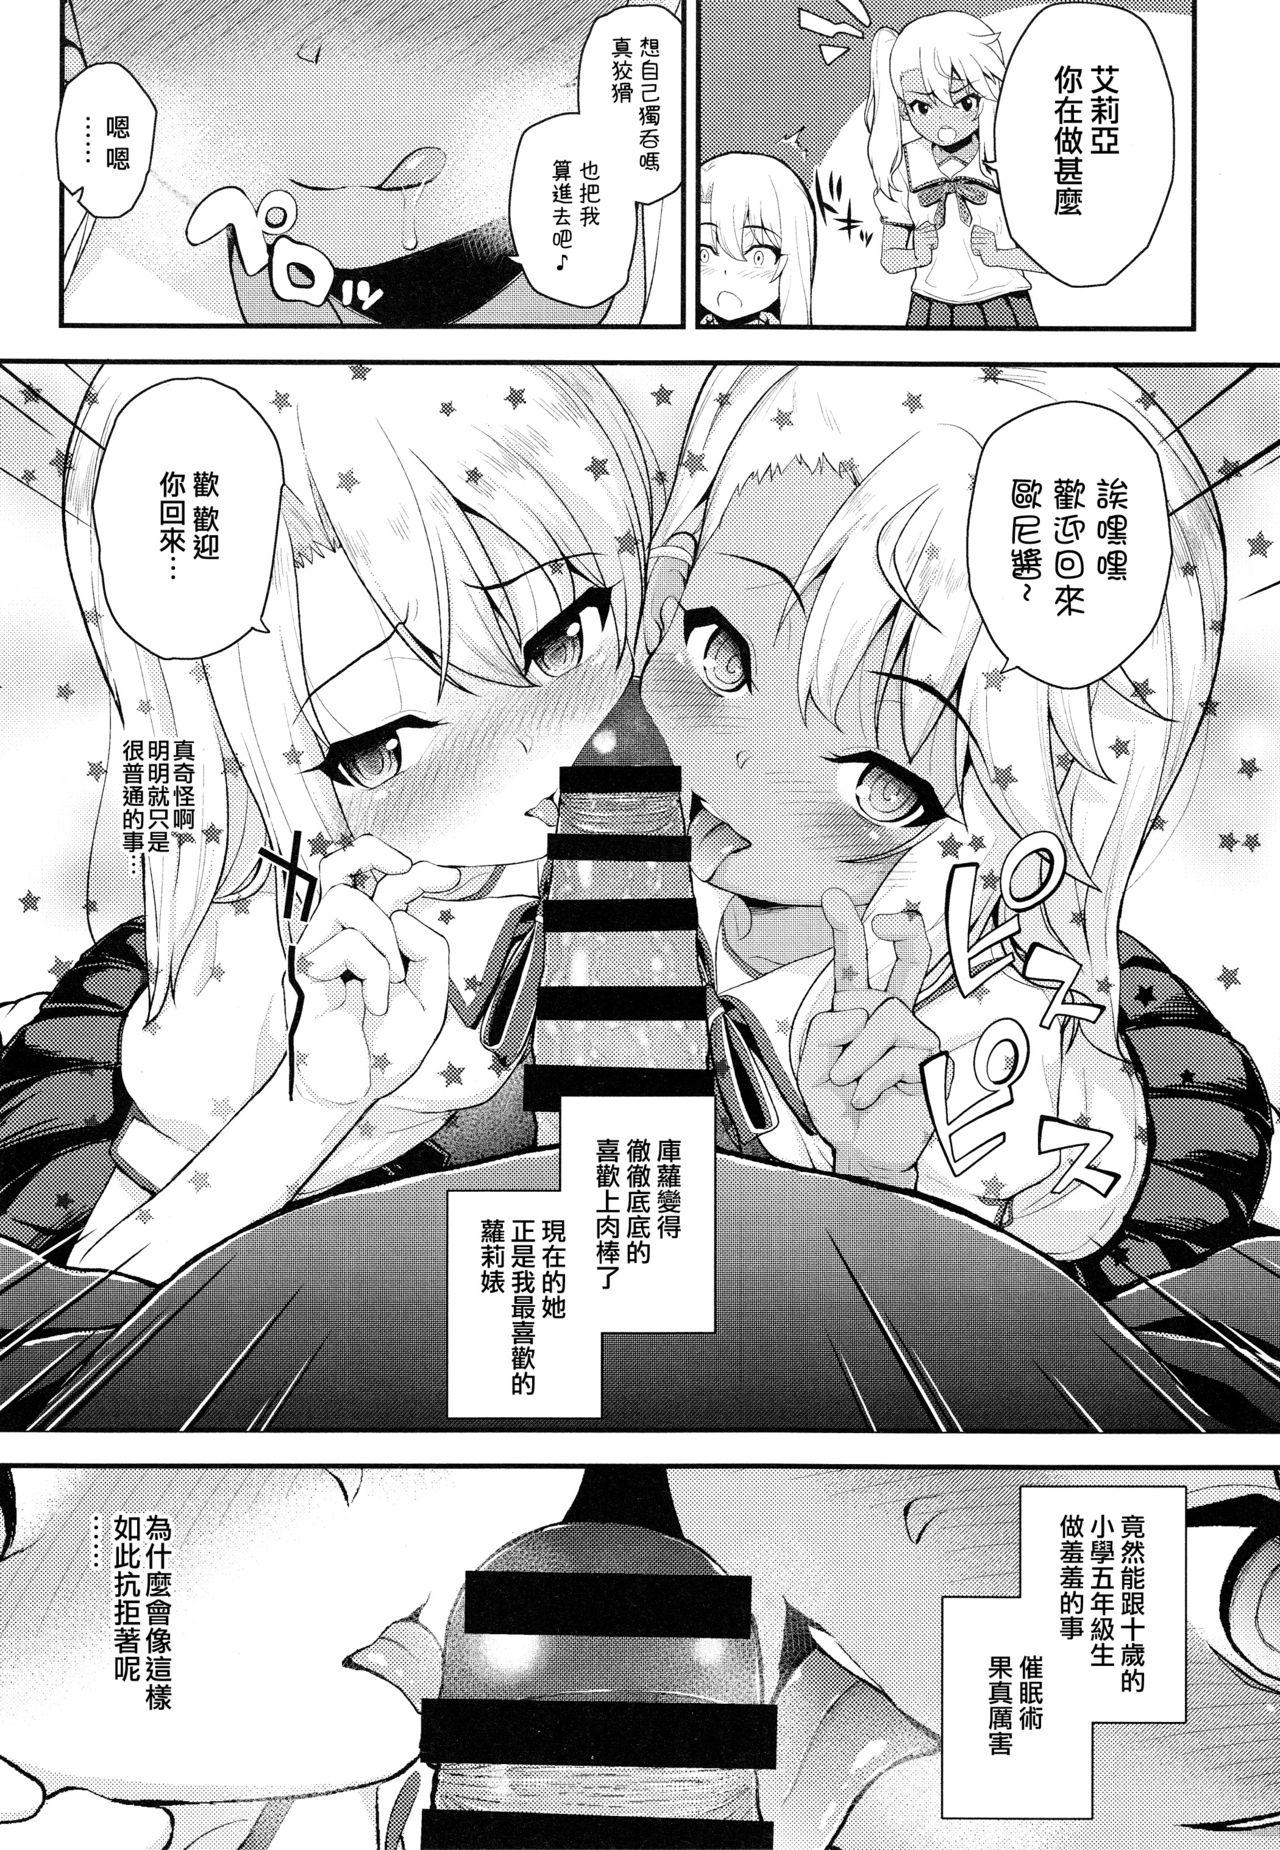 Oral Sex Porn Saimin Choukyou Diary - Fate kaleid liner prisma illya Assfucked - Page 6